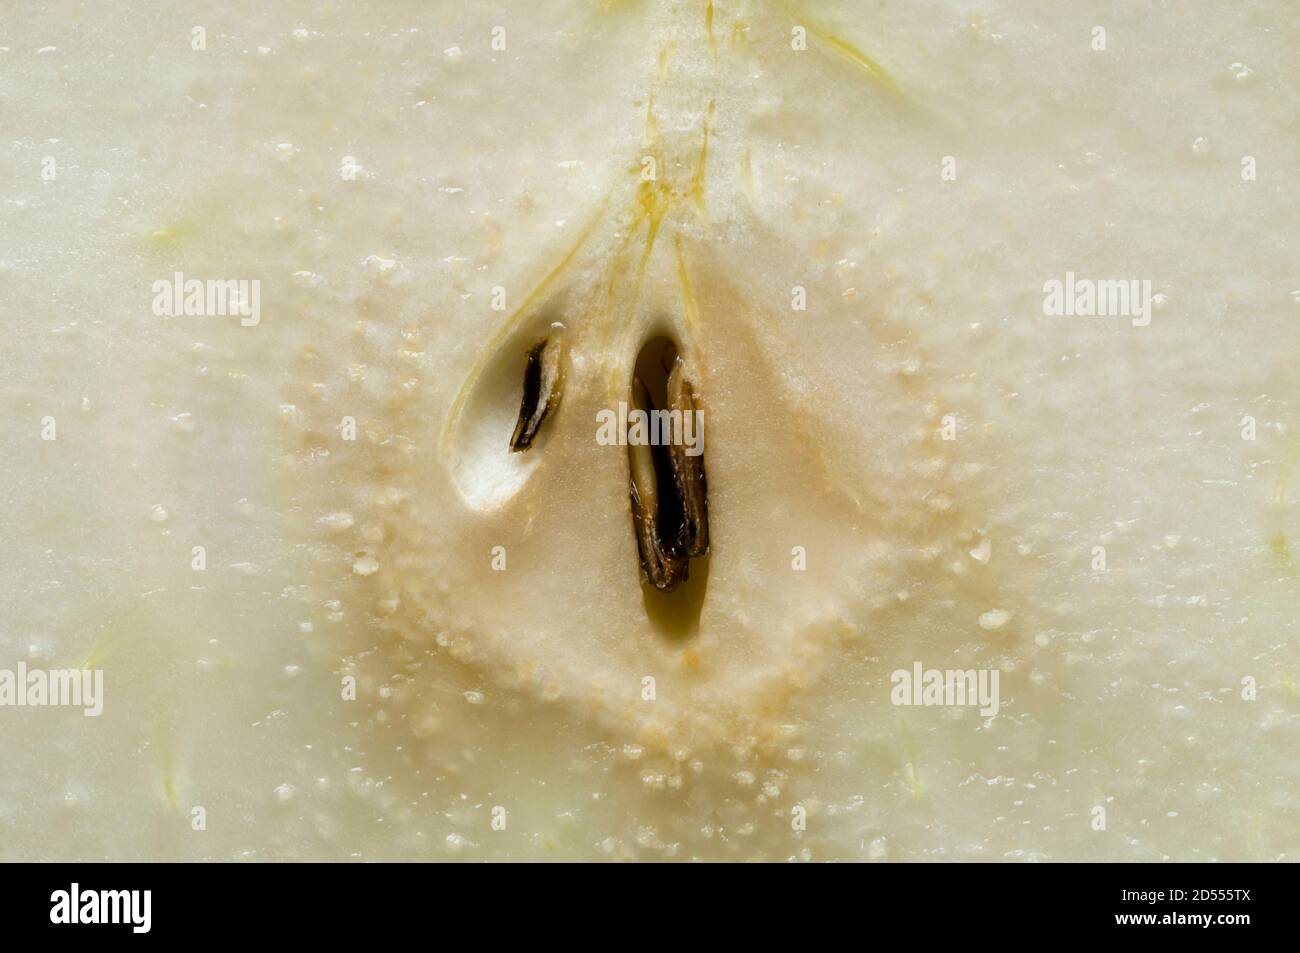 Detail of pulp with seeds of a pear Stock Photo